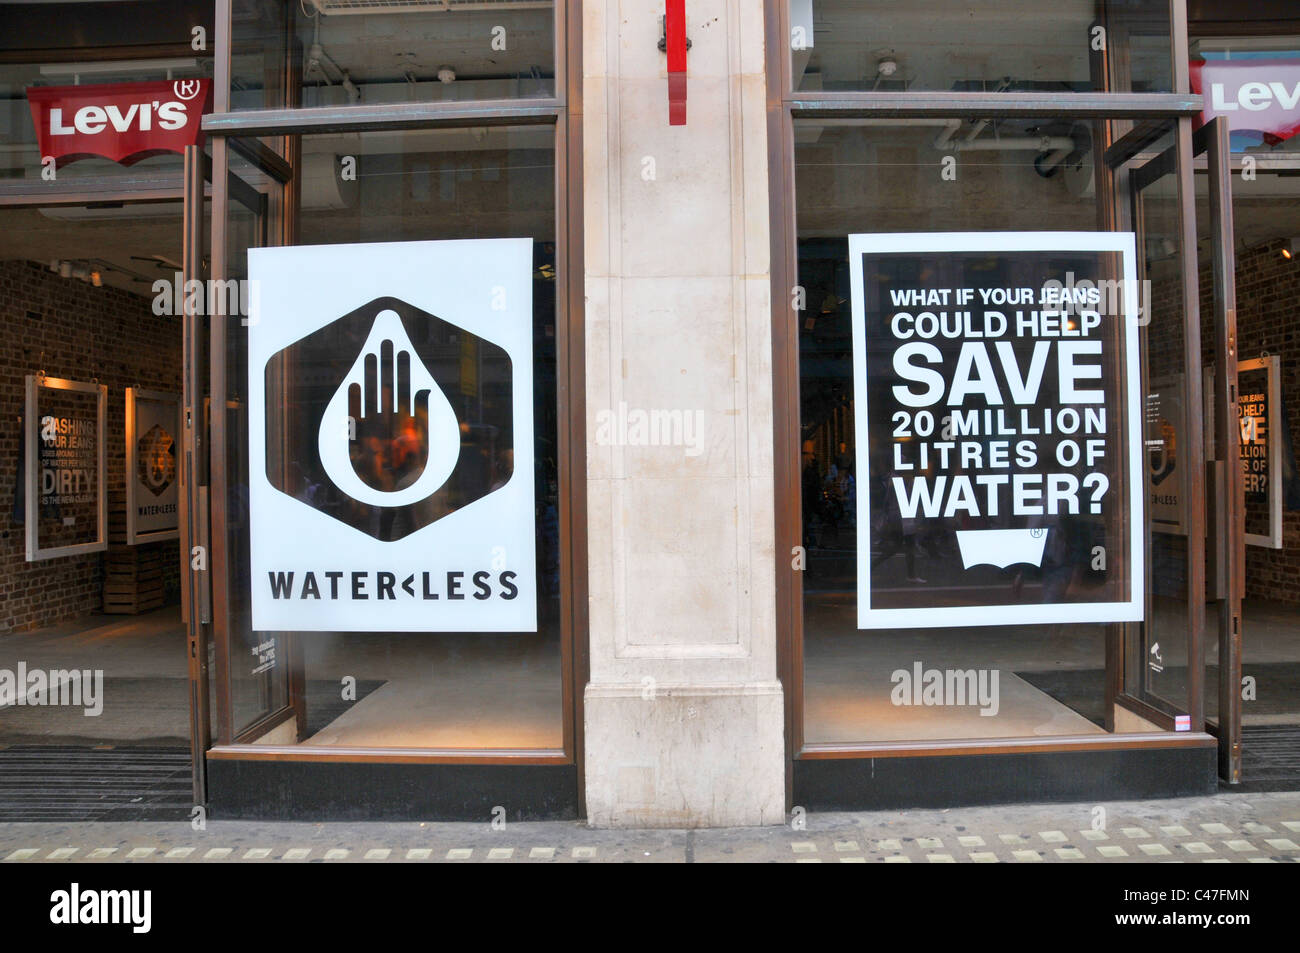 Levis store slogan waterless save water jeans Photo -